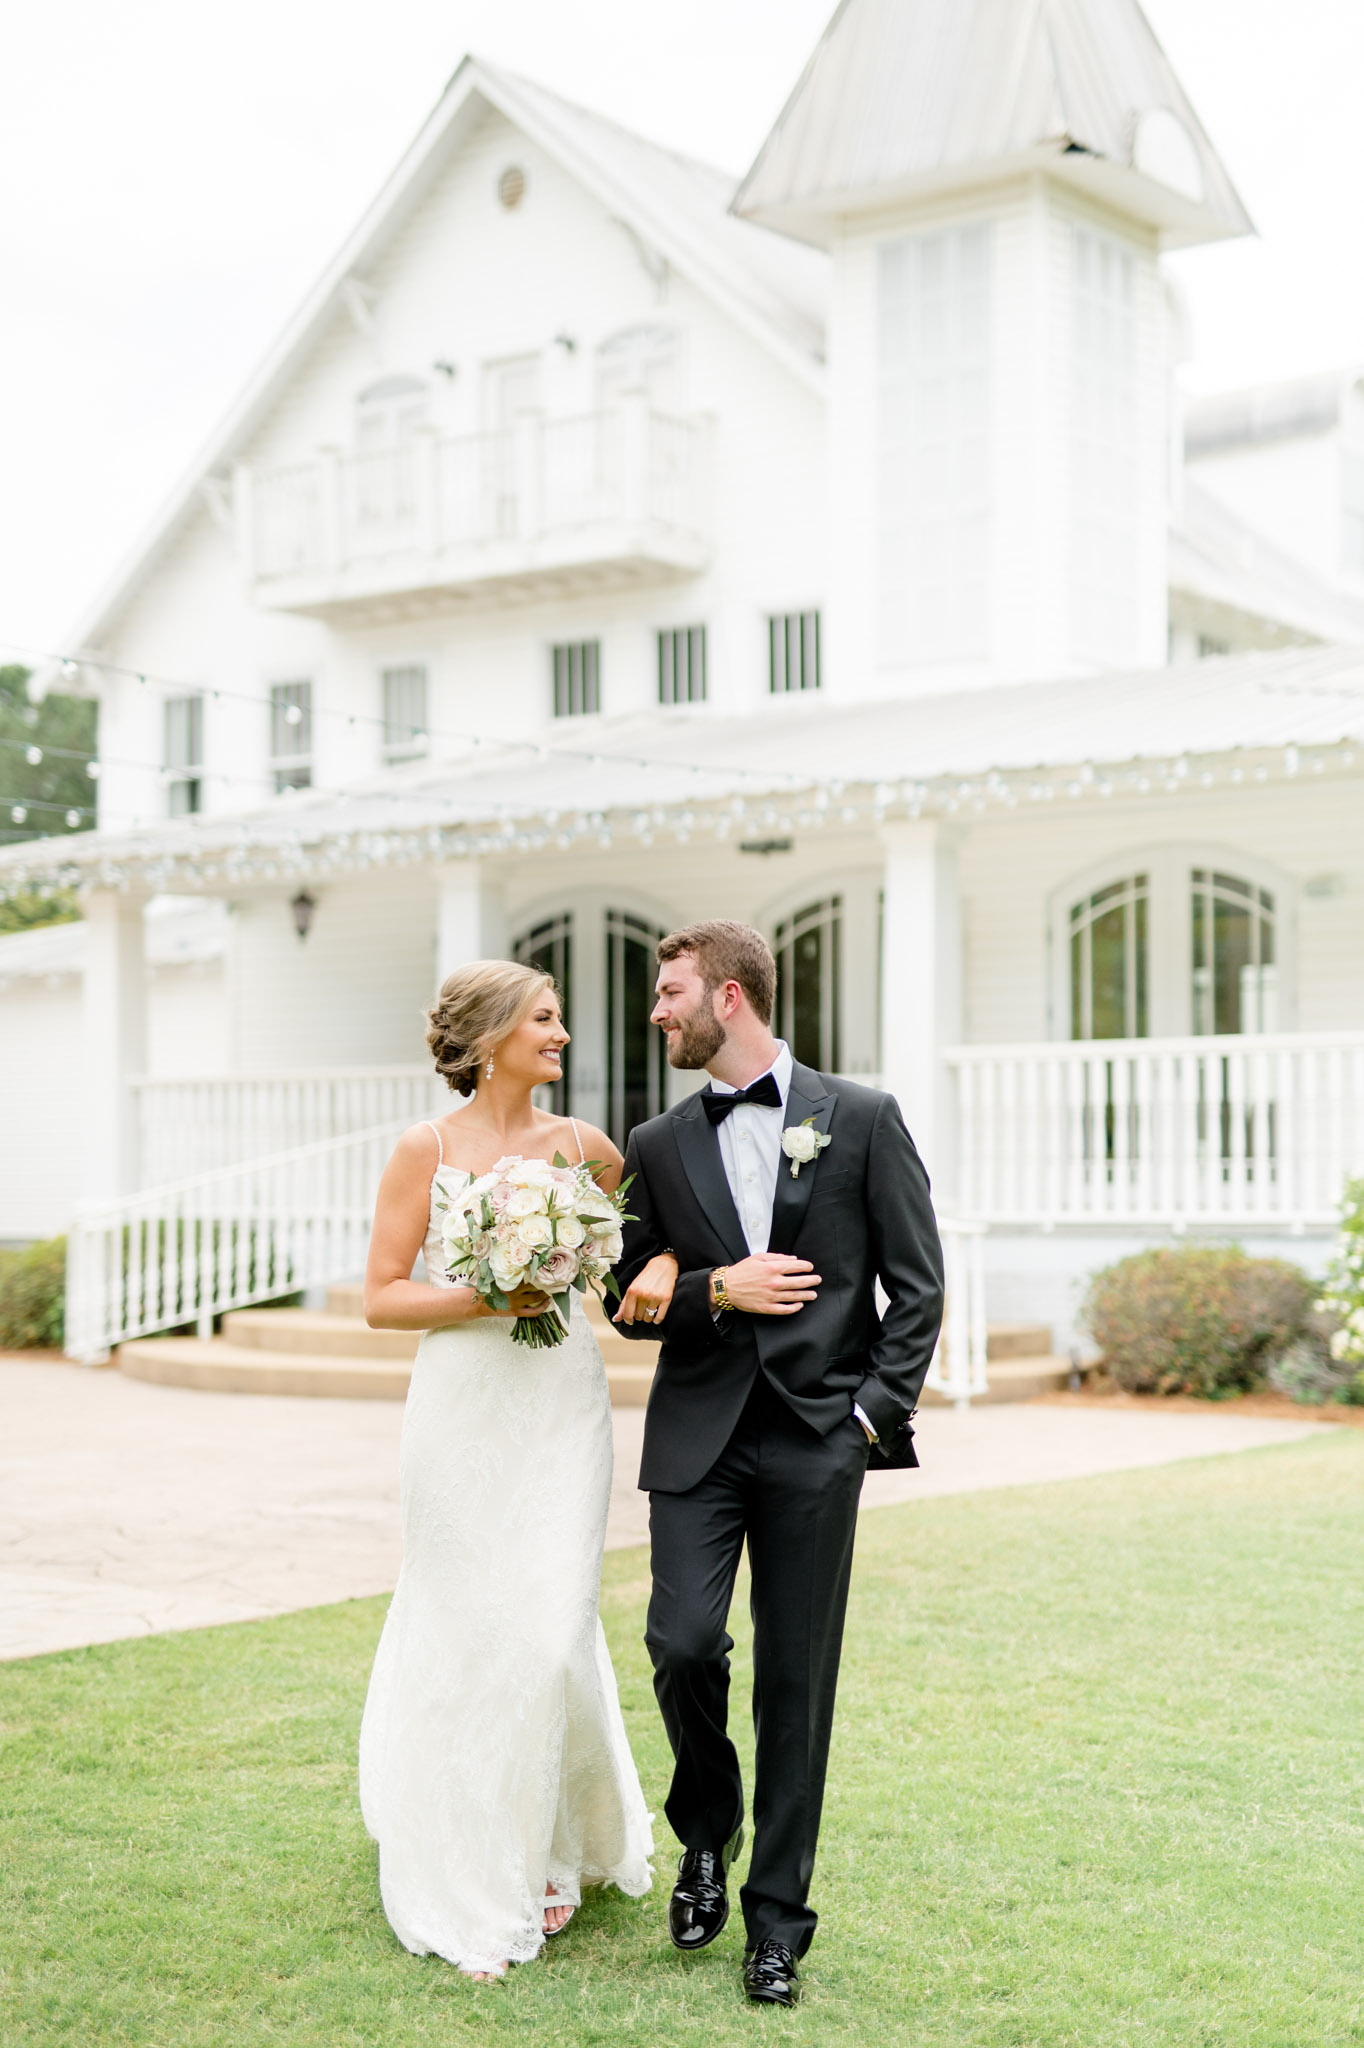 Bride and groom smile while walking across The Sonnet House lawn.